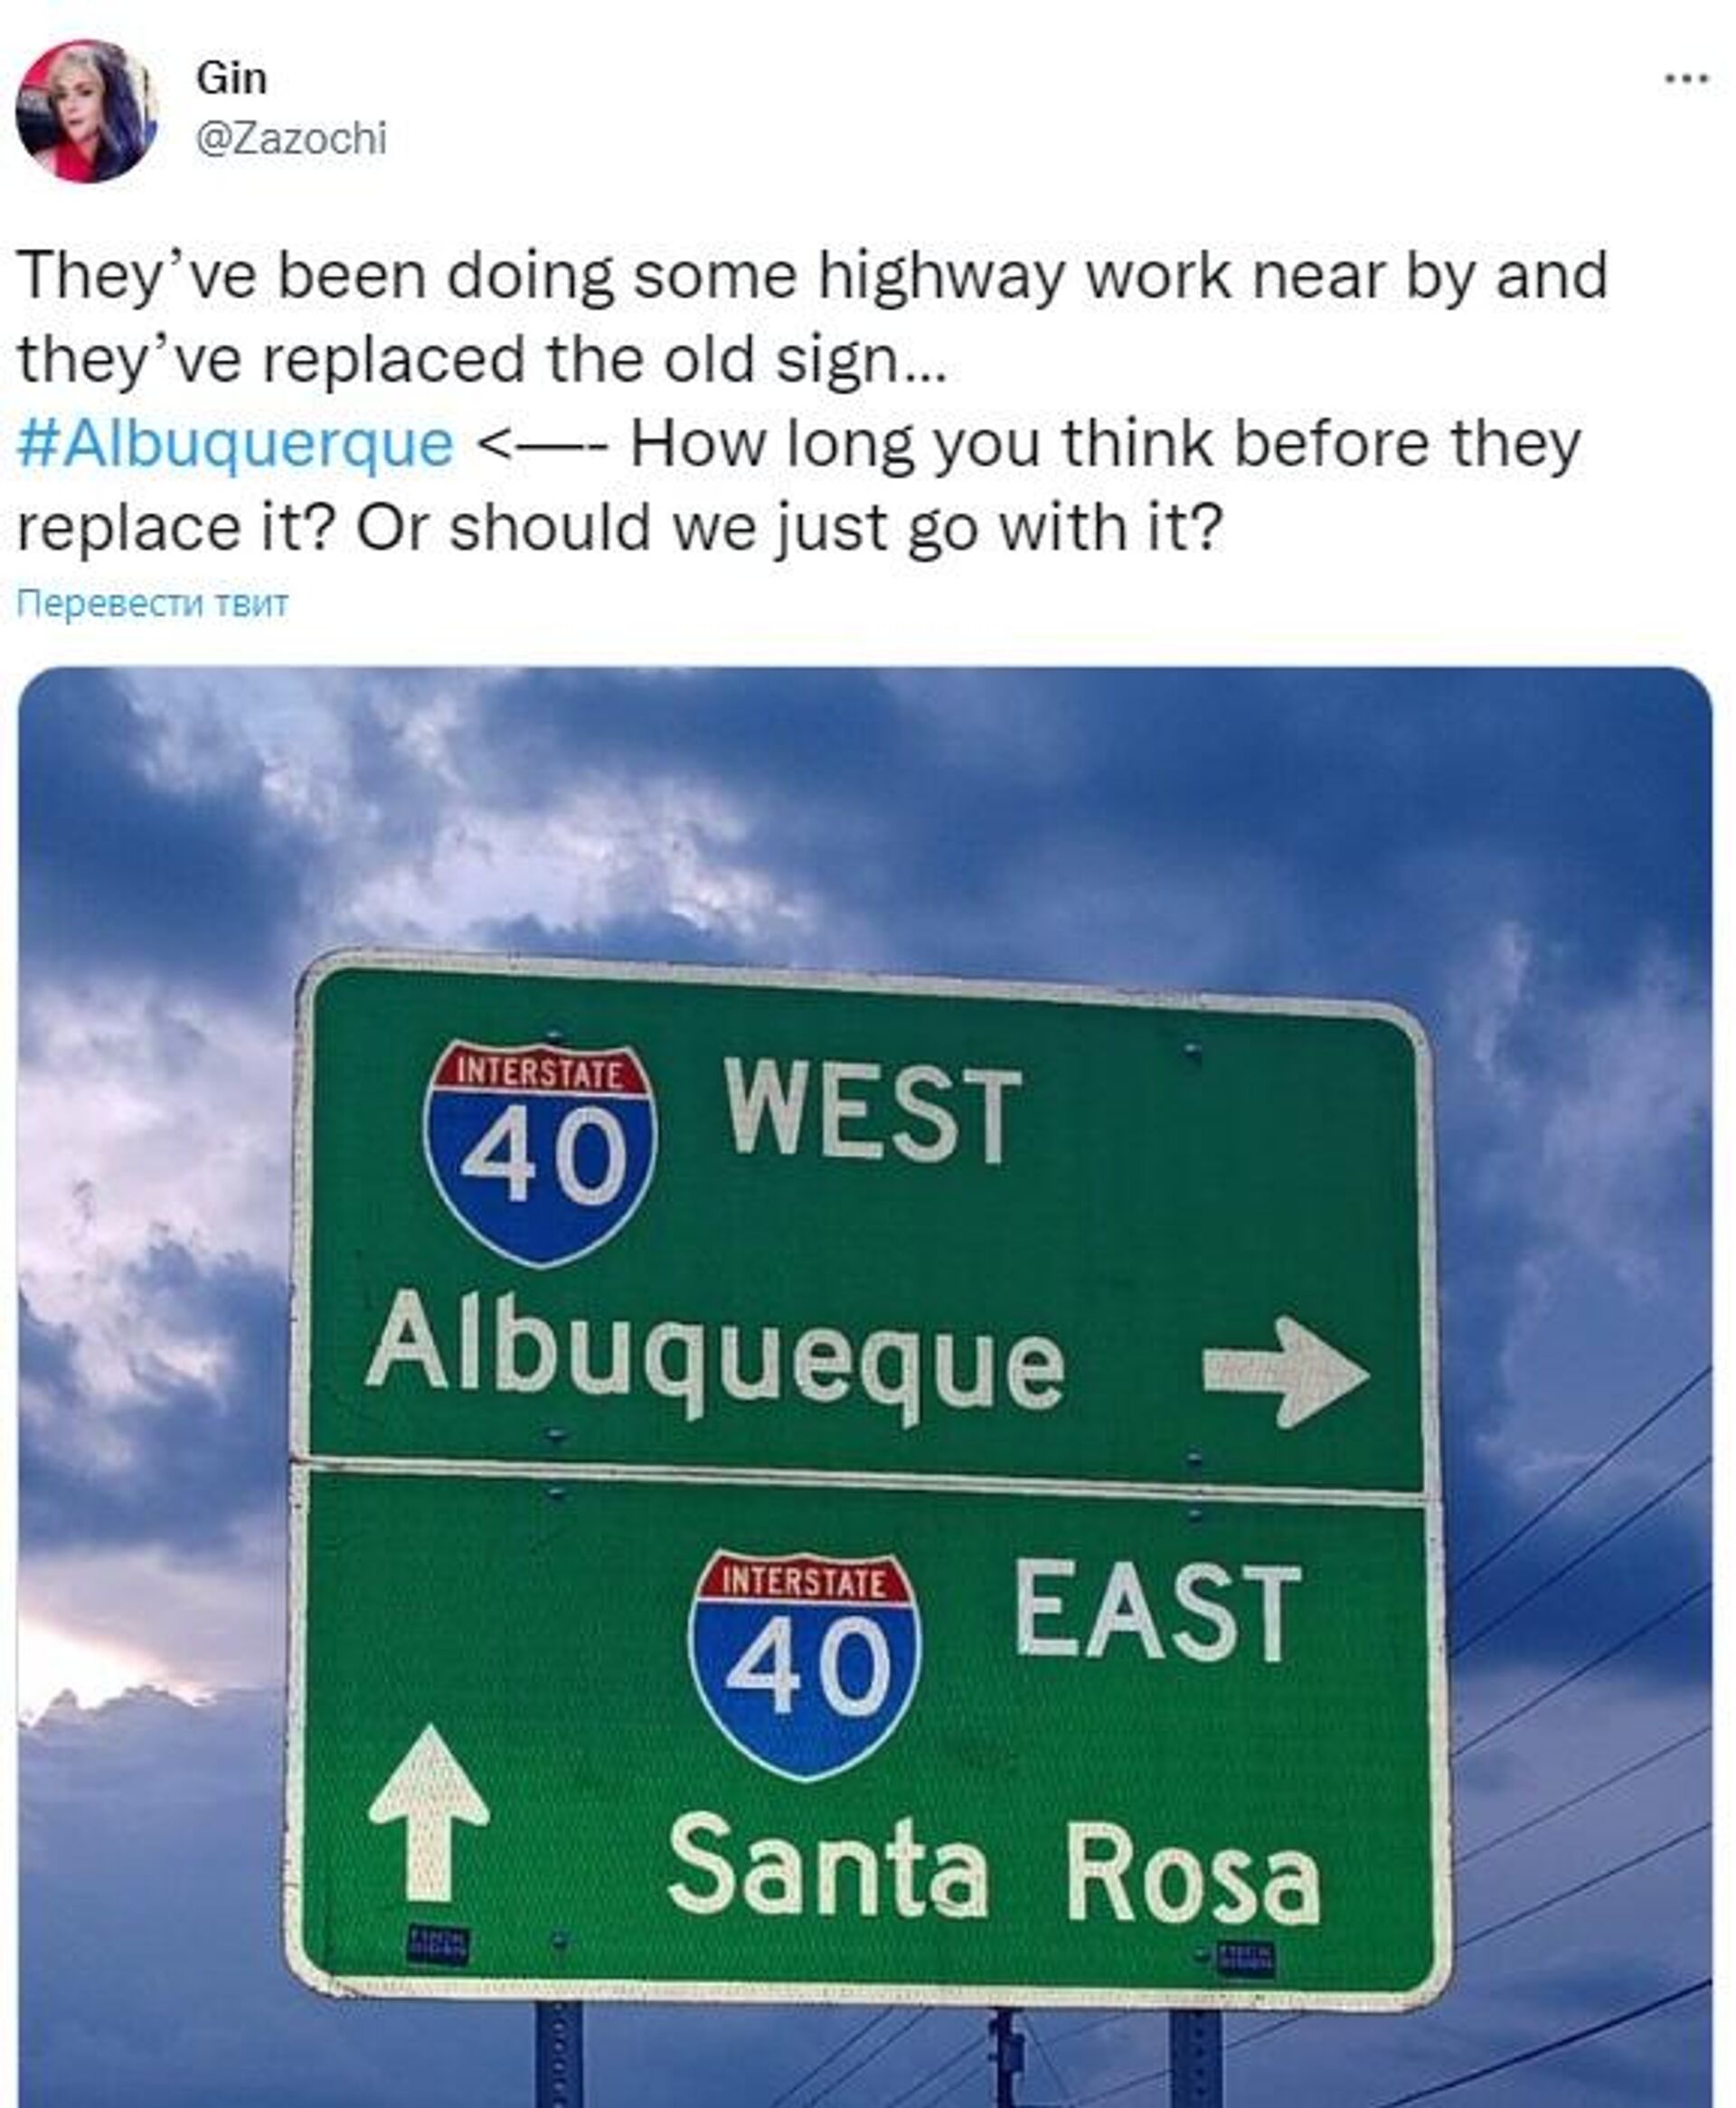 Albuquerque Spelled Wrong on Highway Sign in New Mexico - Sputnik International, 1920, 31.07.2022